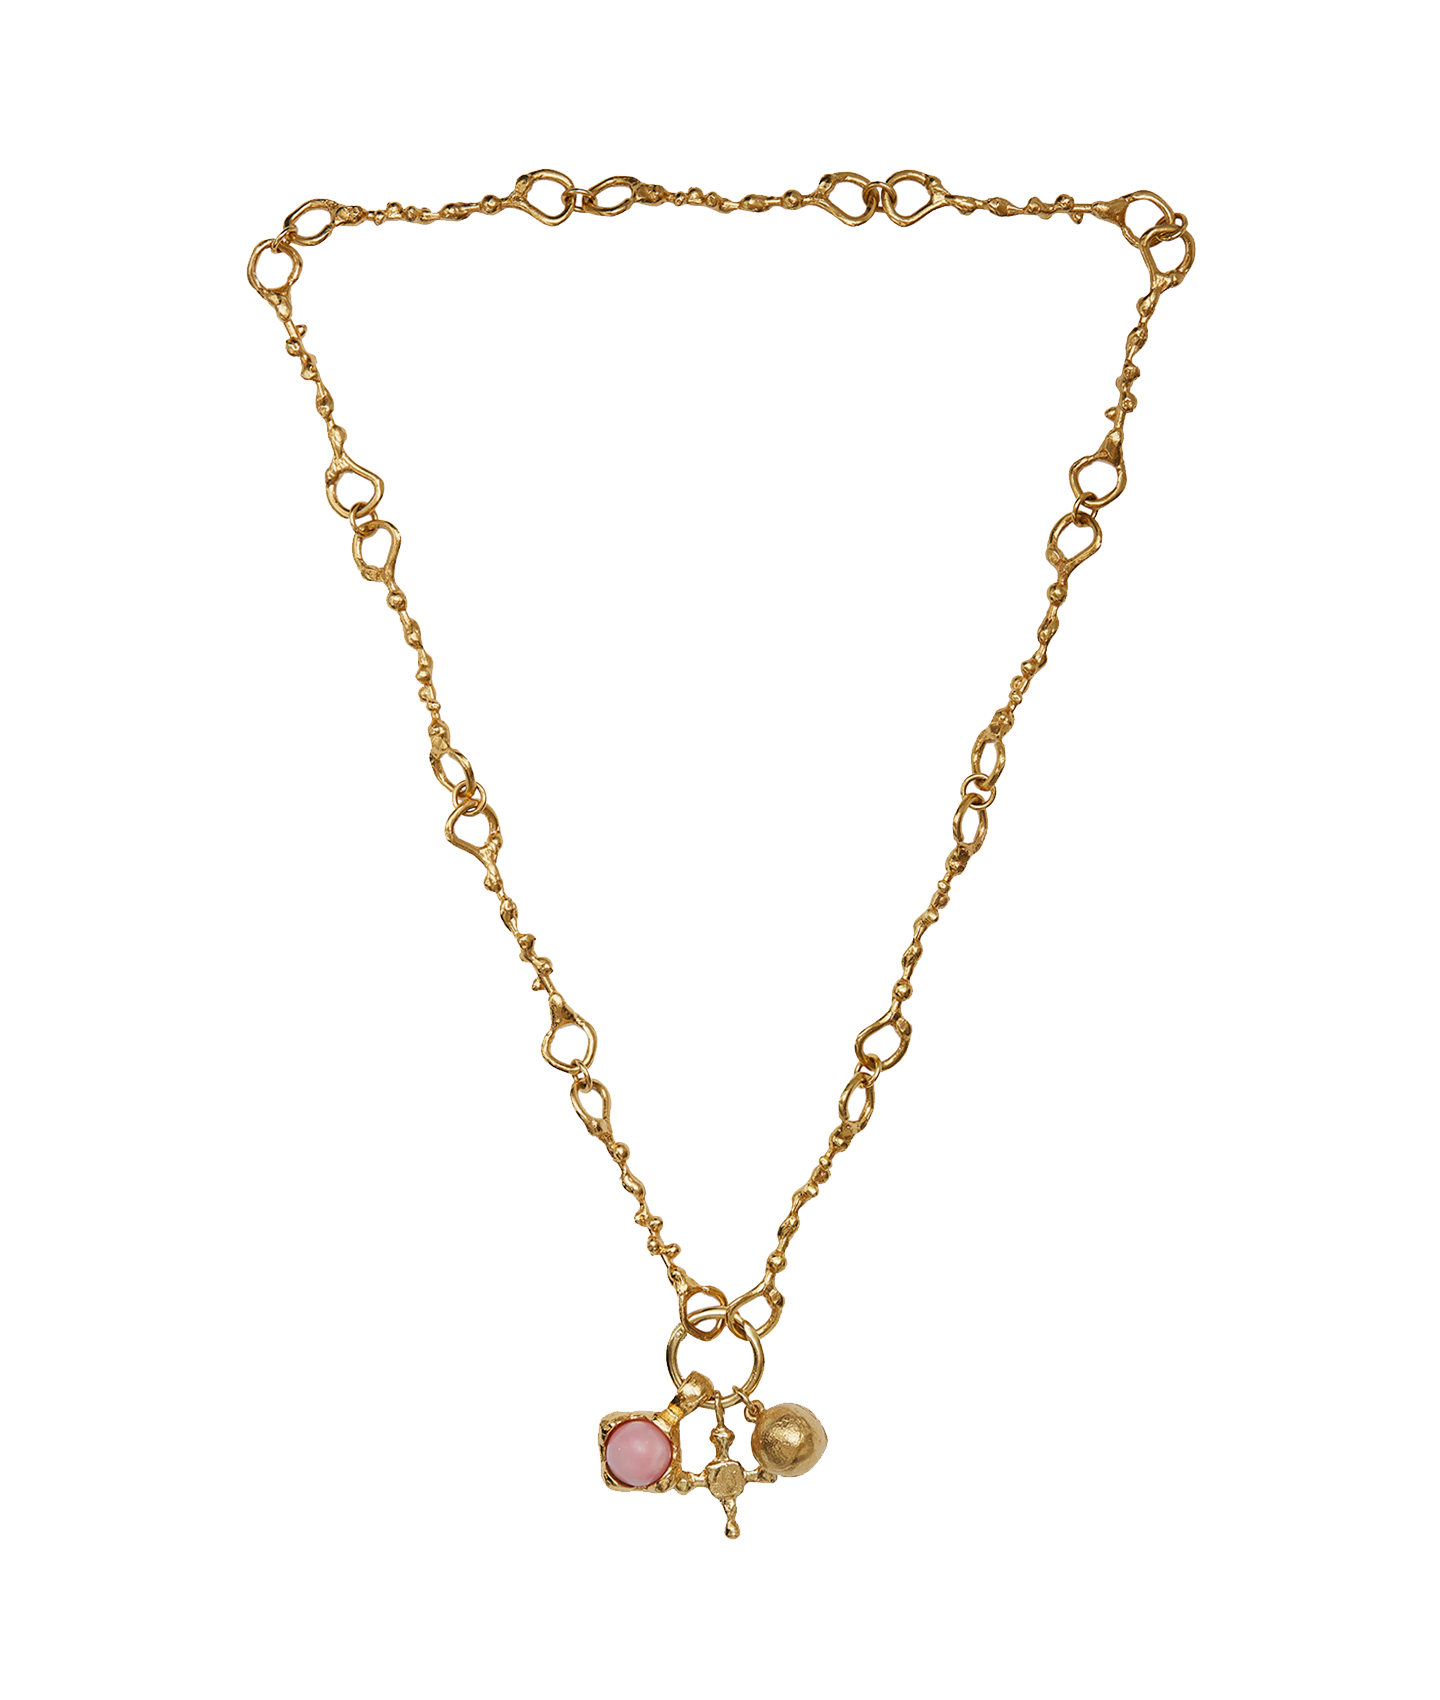 The Celestial Charms Necklace